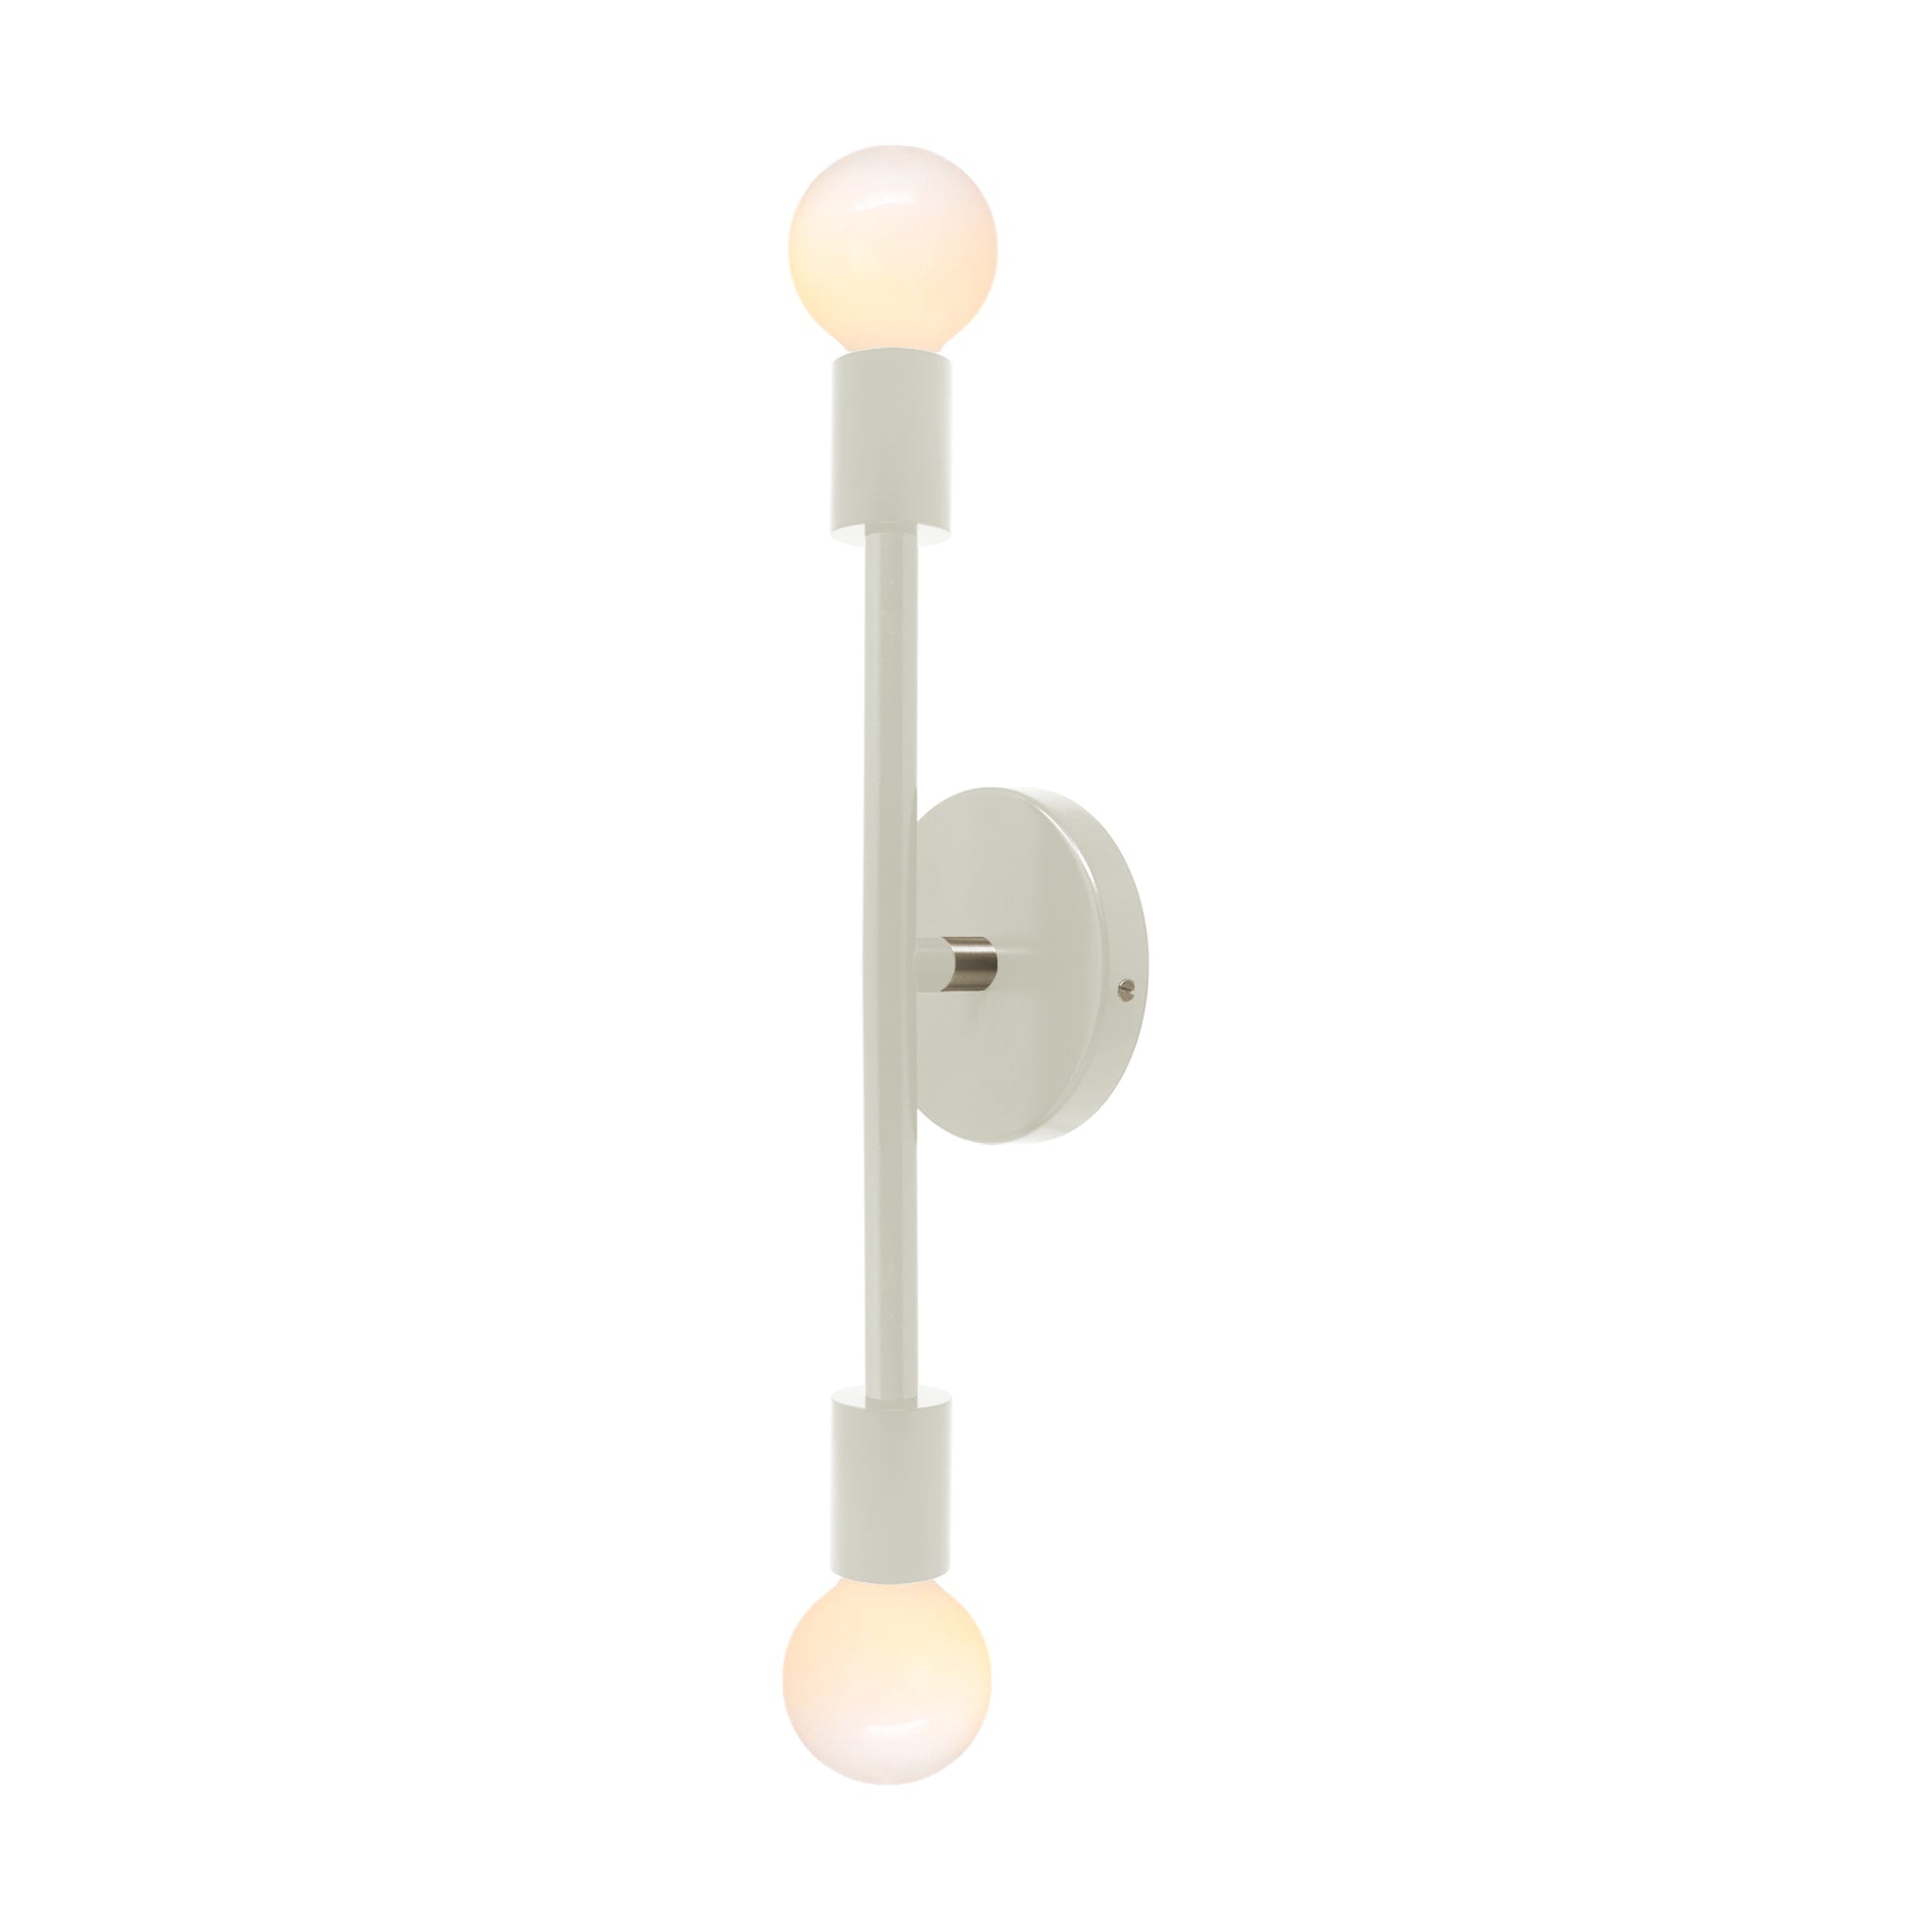 Nickel and white color Pilot sconce 17" Dutton Brown lighting